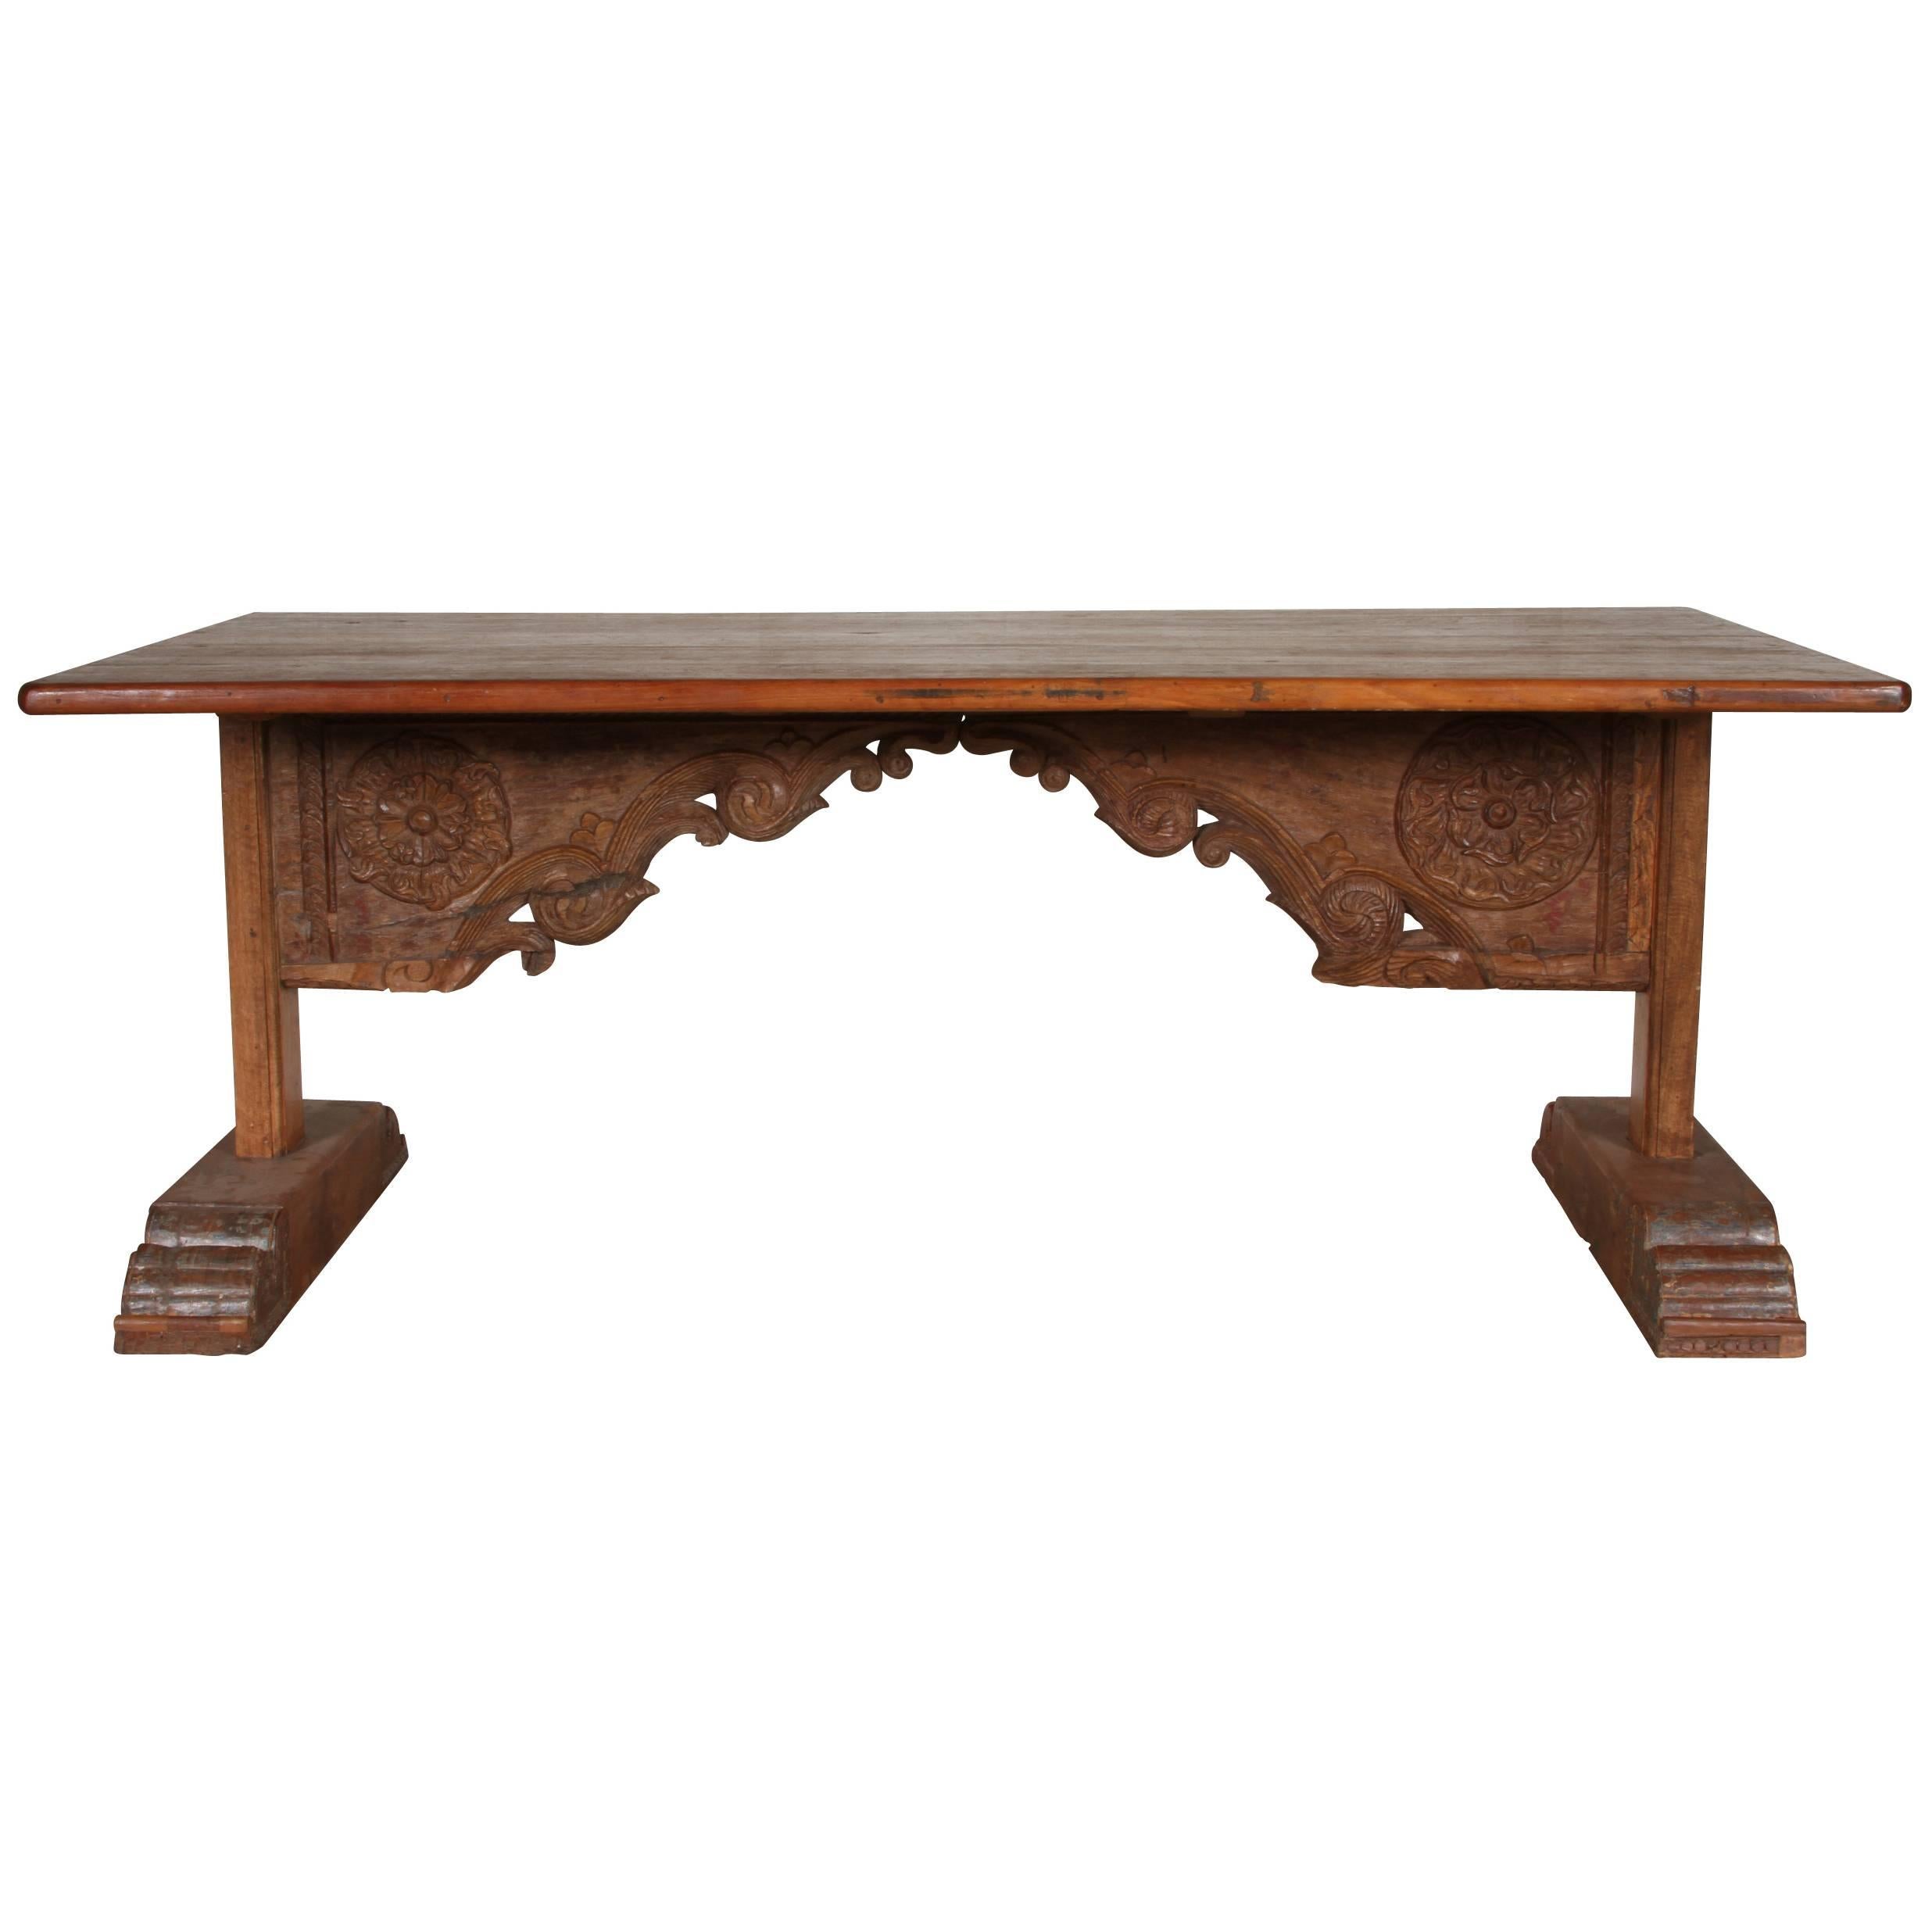 Indian Wood Table with Incorporated Antique Carved Lintel